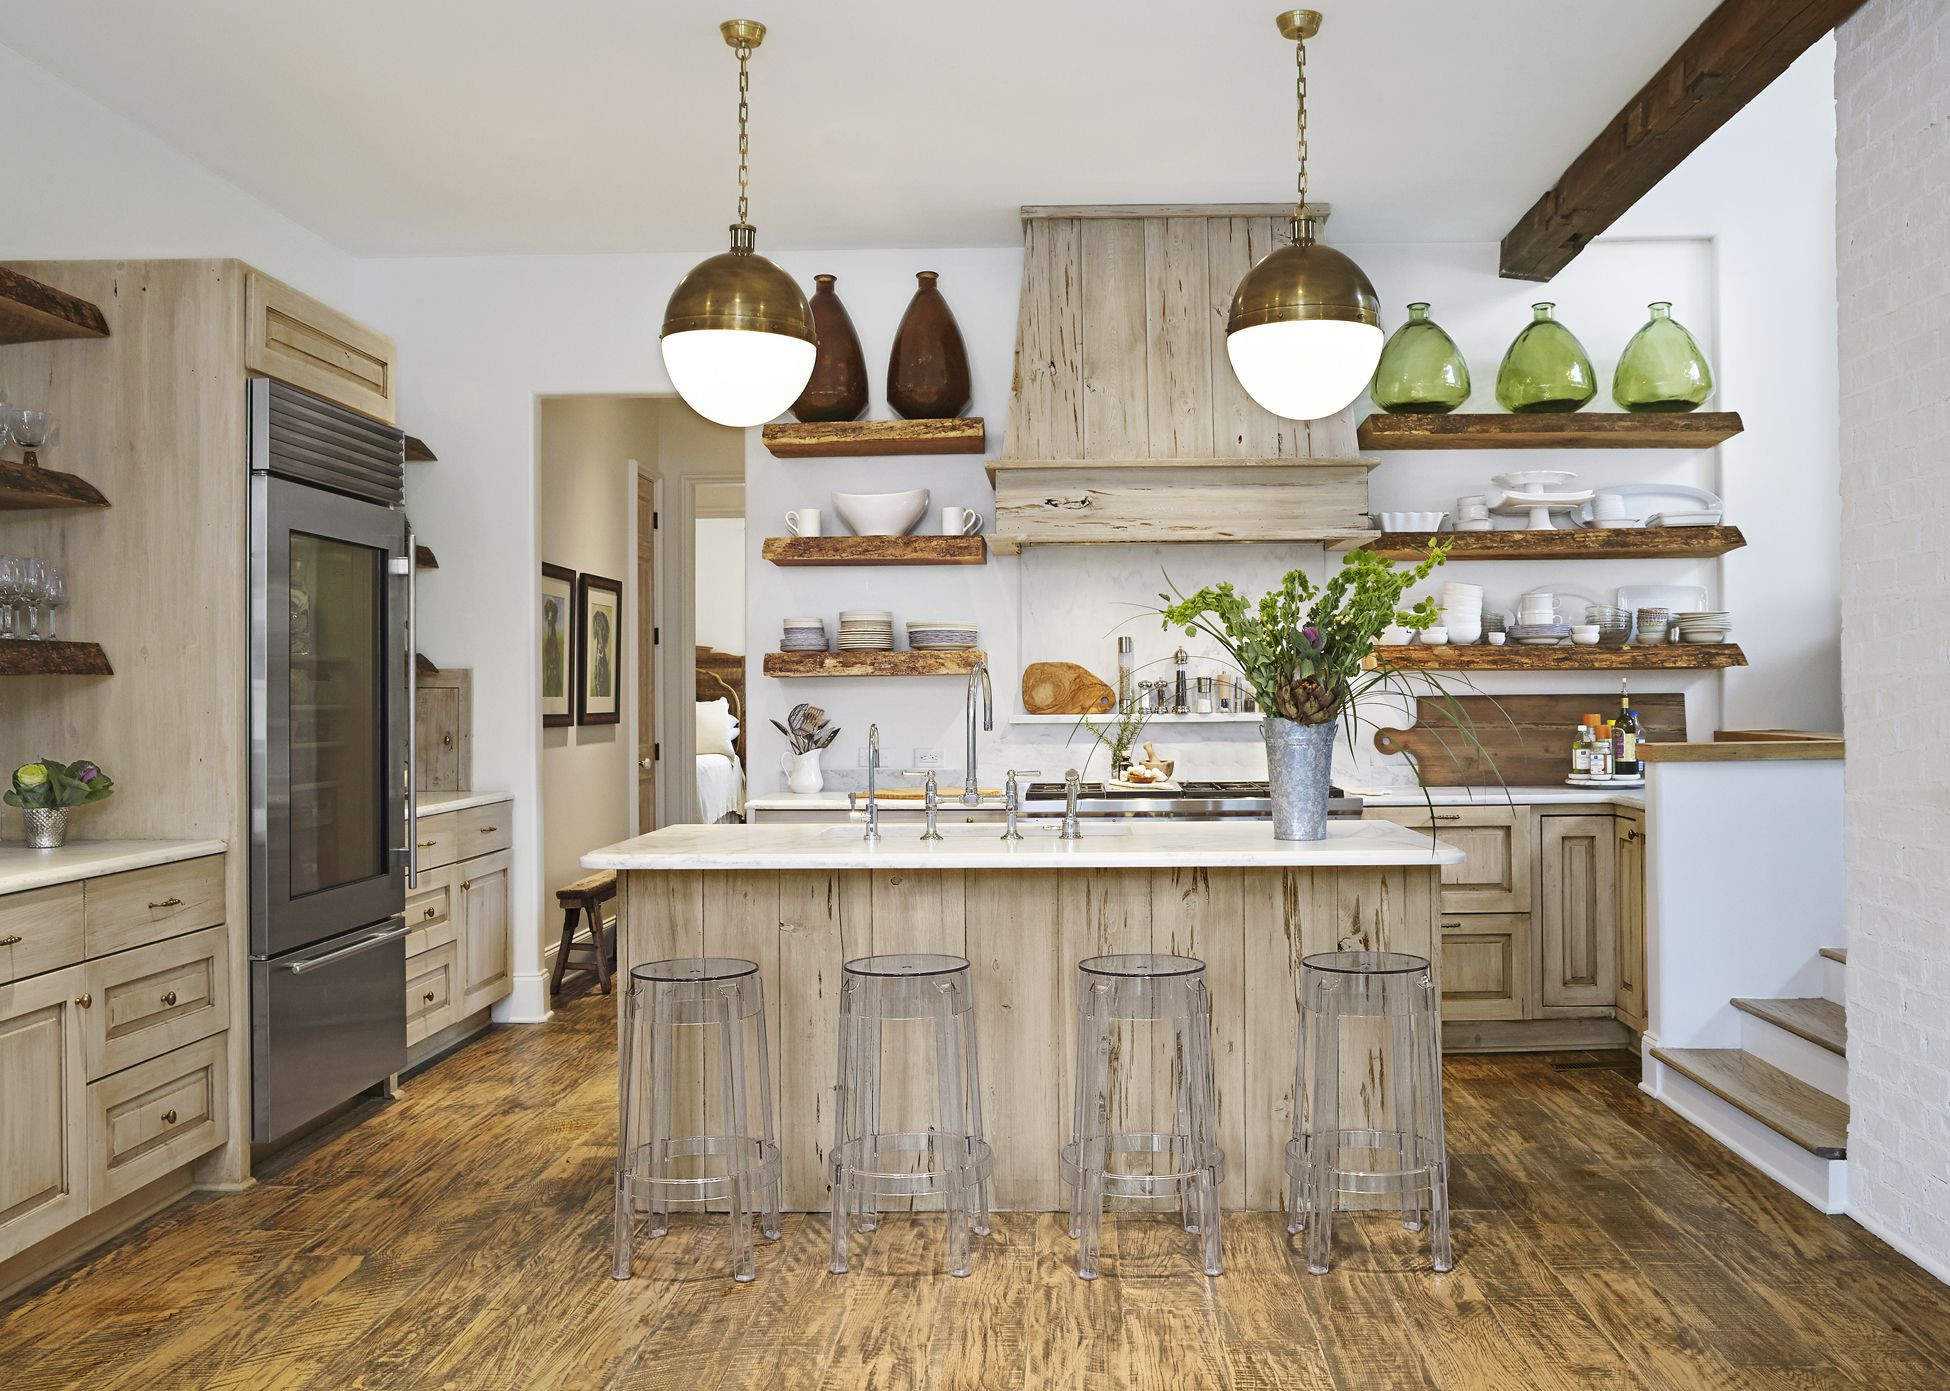 11 Famous Hardwood Flooring Trends for 2017 2022 free download hardwood flooring trends for 2017 of 8 gorgeous kitchen trends that will be huge in 2018 for 1483474851 kitchen reinvention reclaimed wood 0117